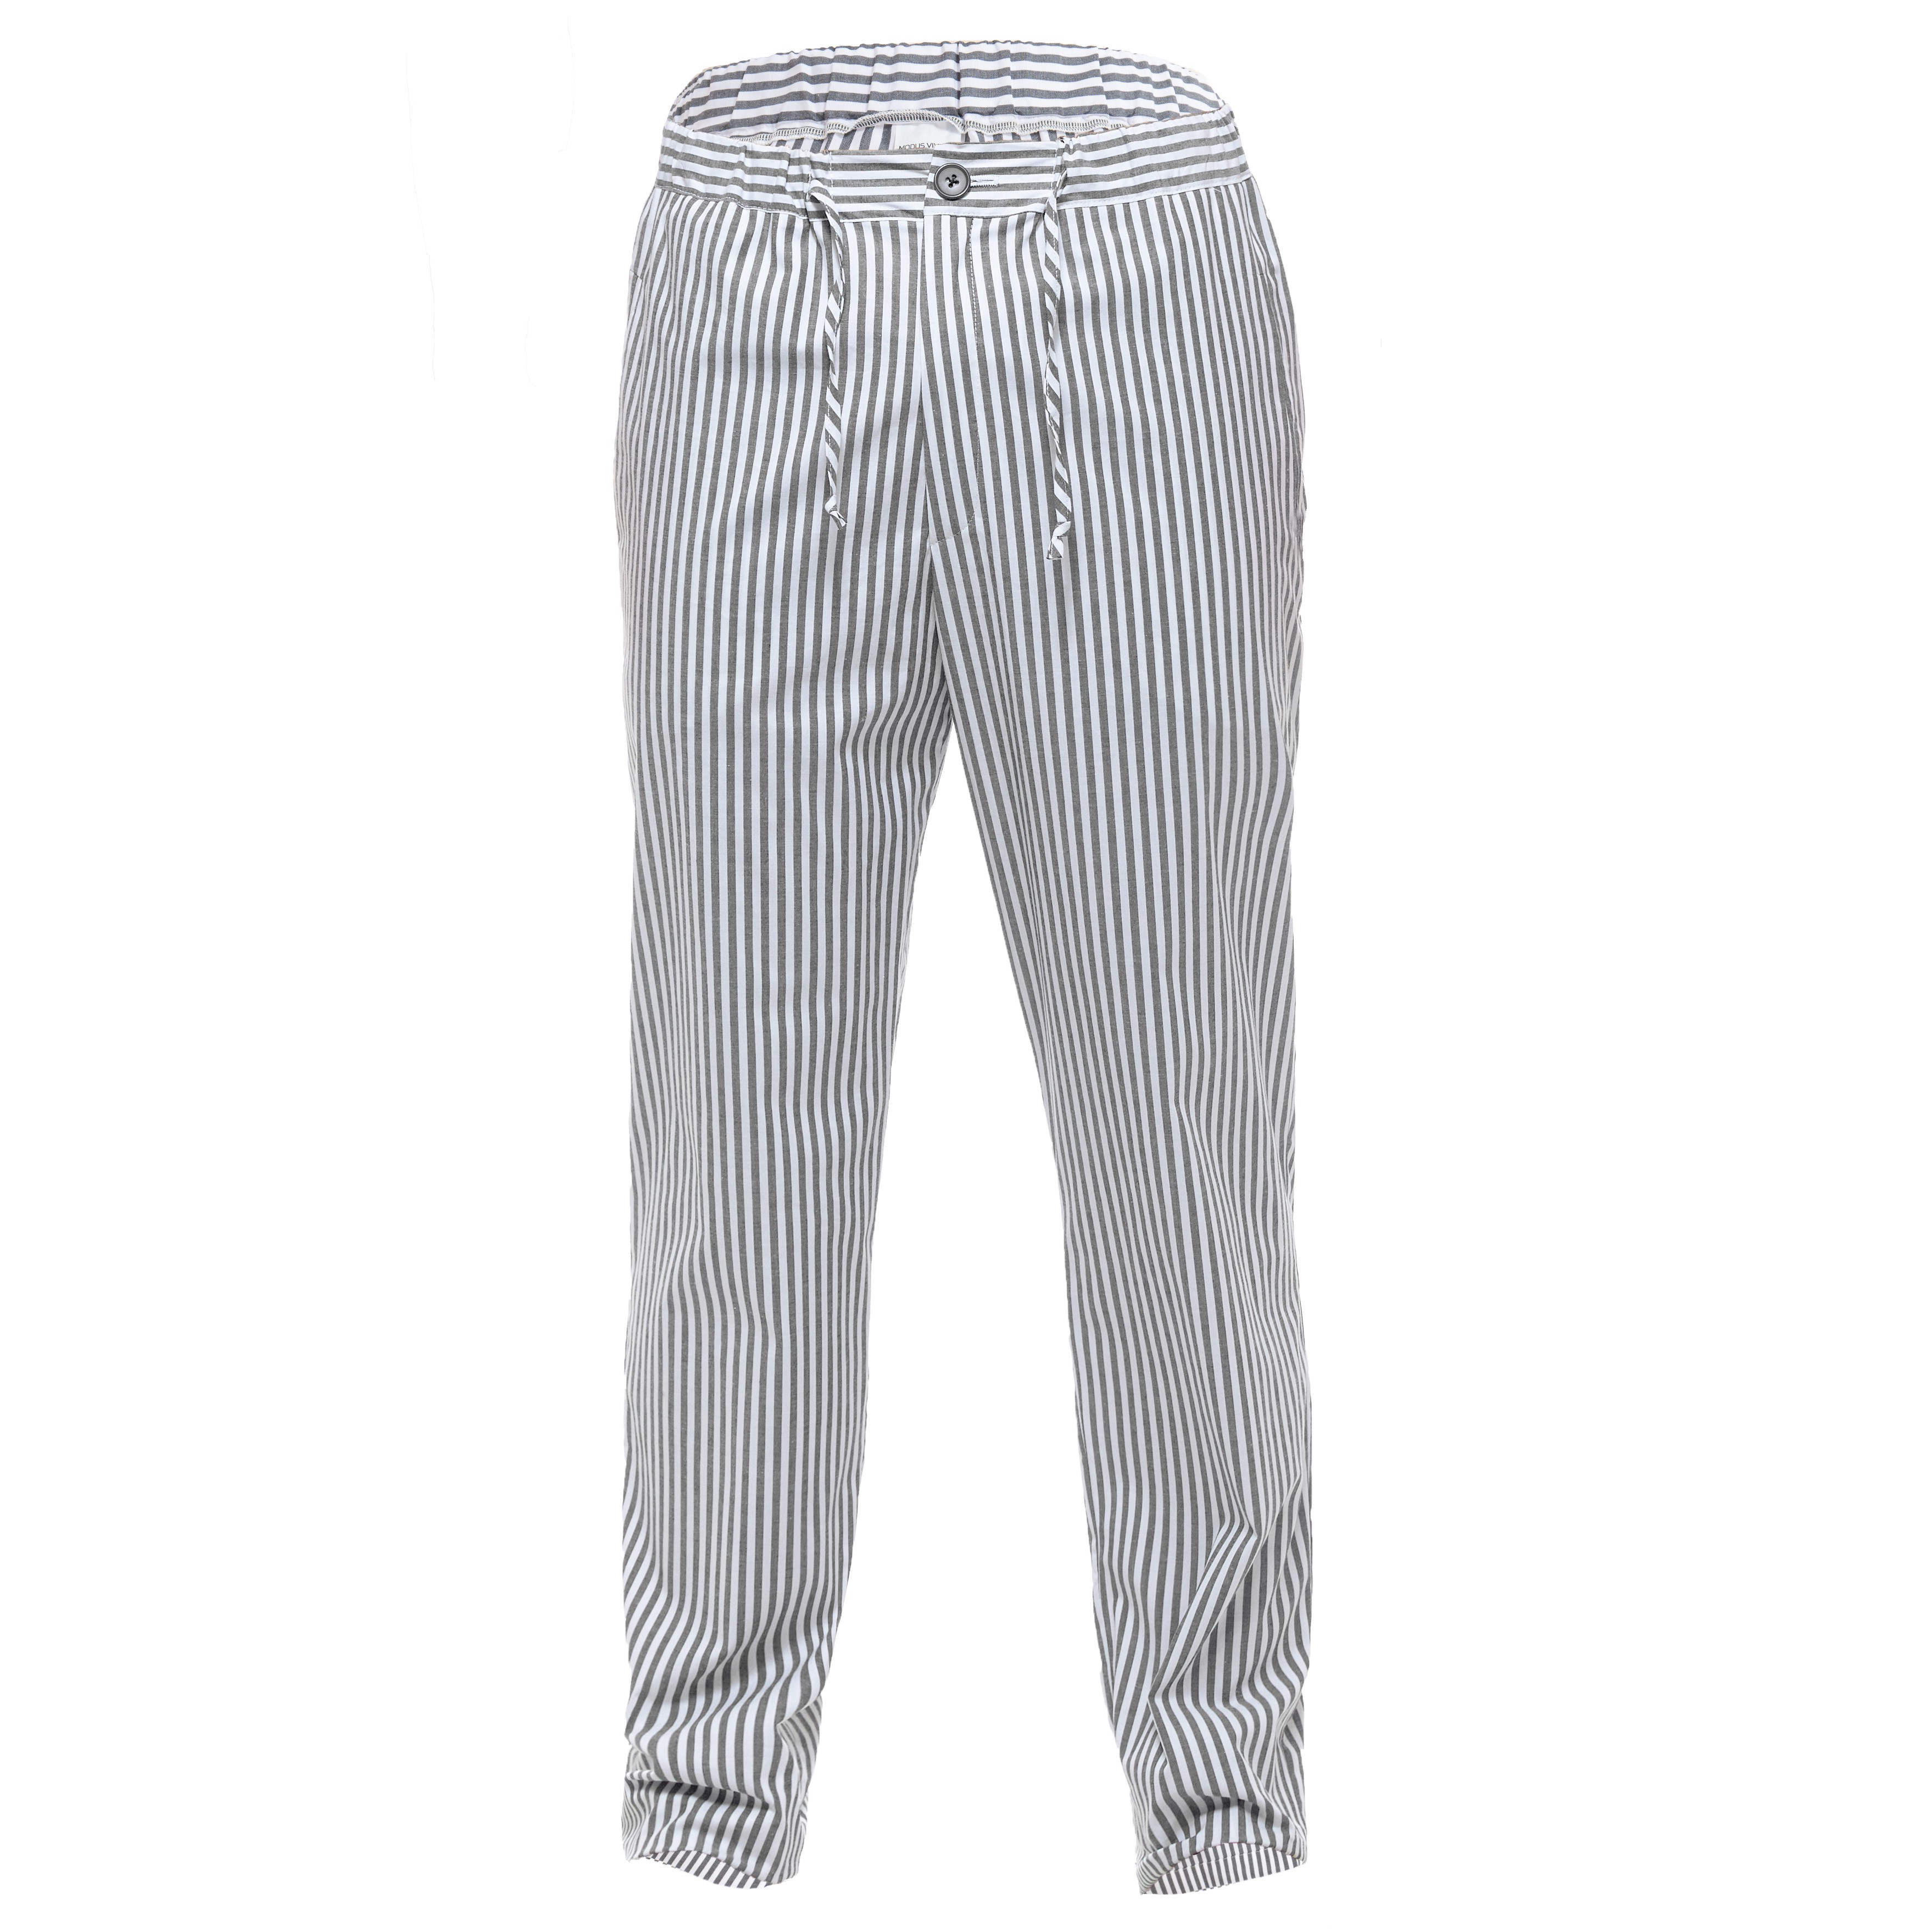 Breton Trousers: Shorts and for man brand Modus Vivend...